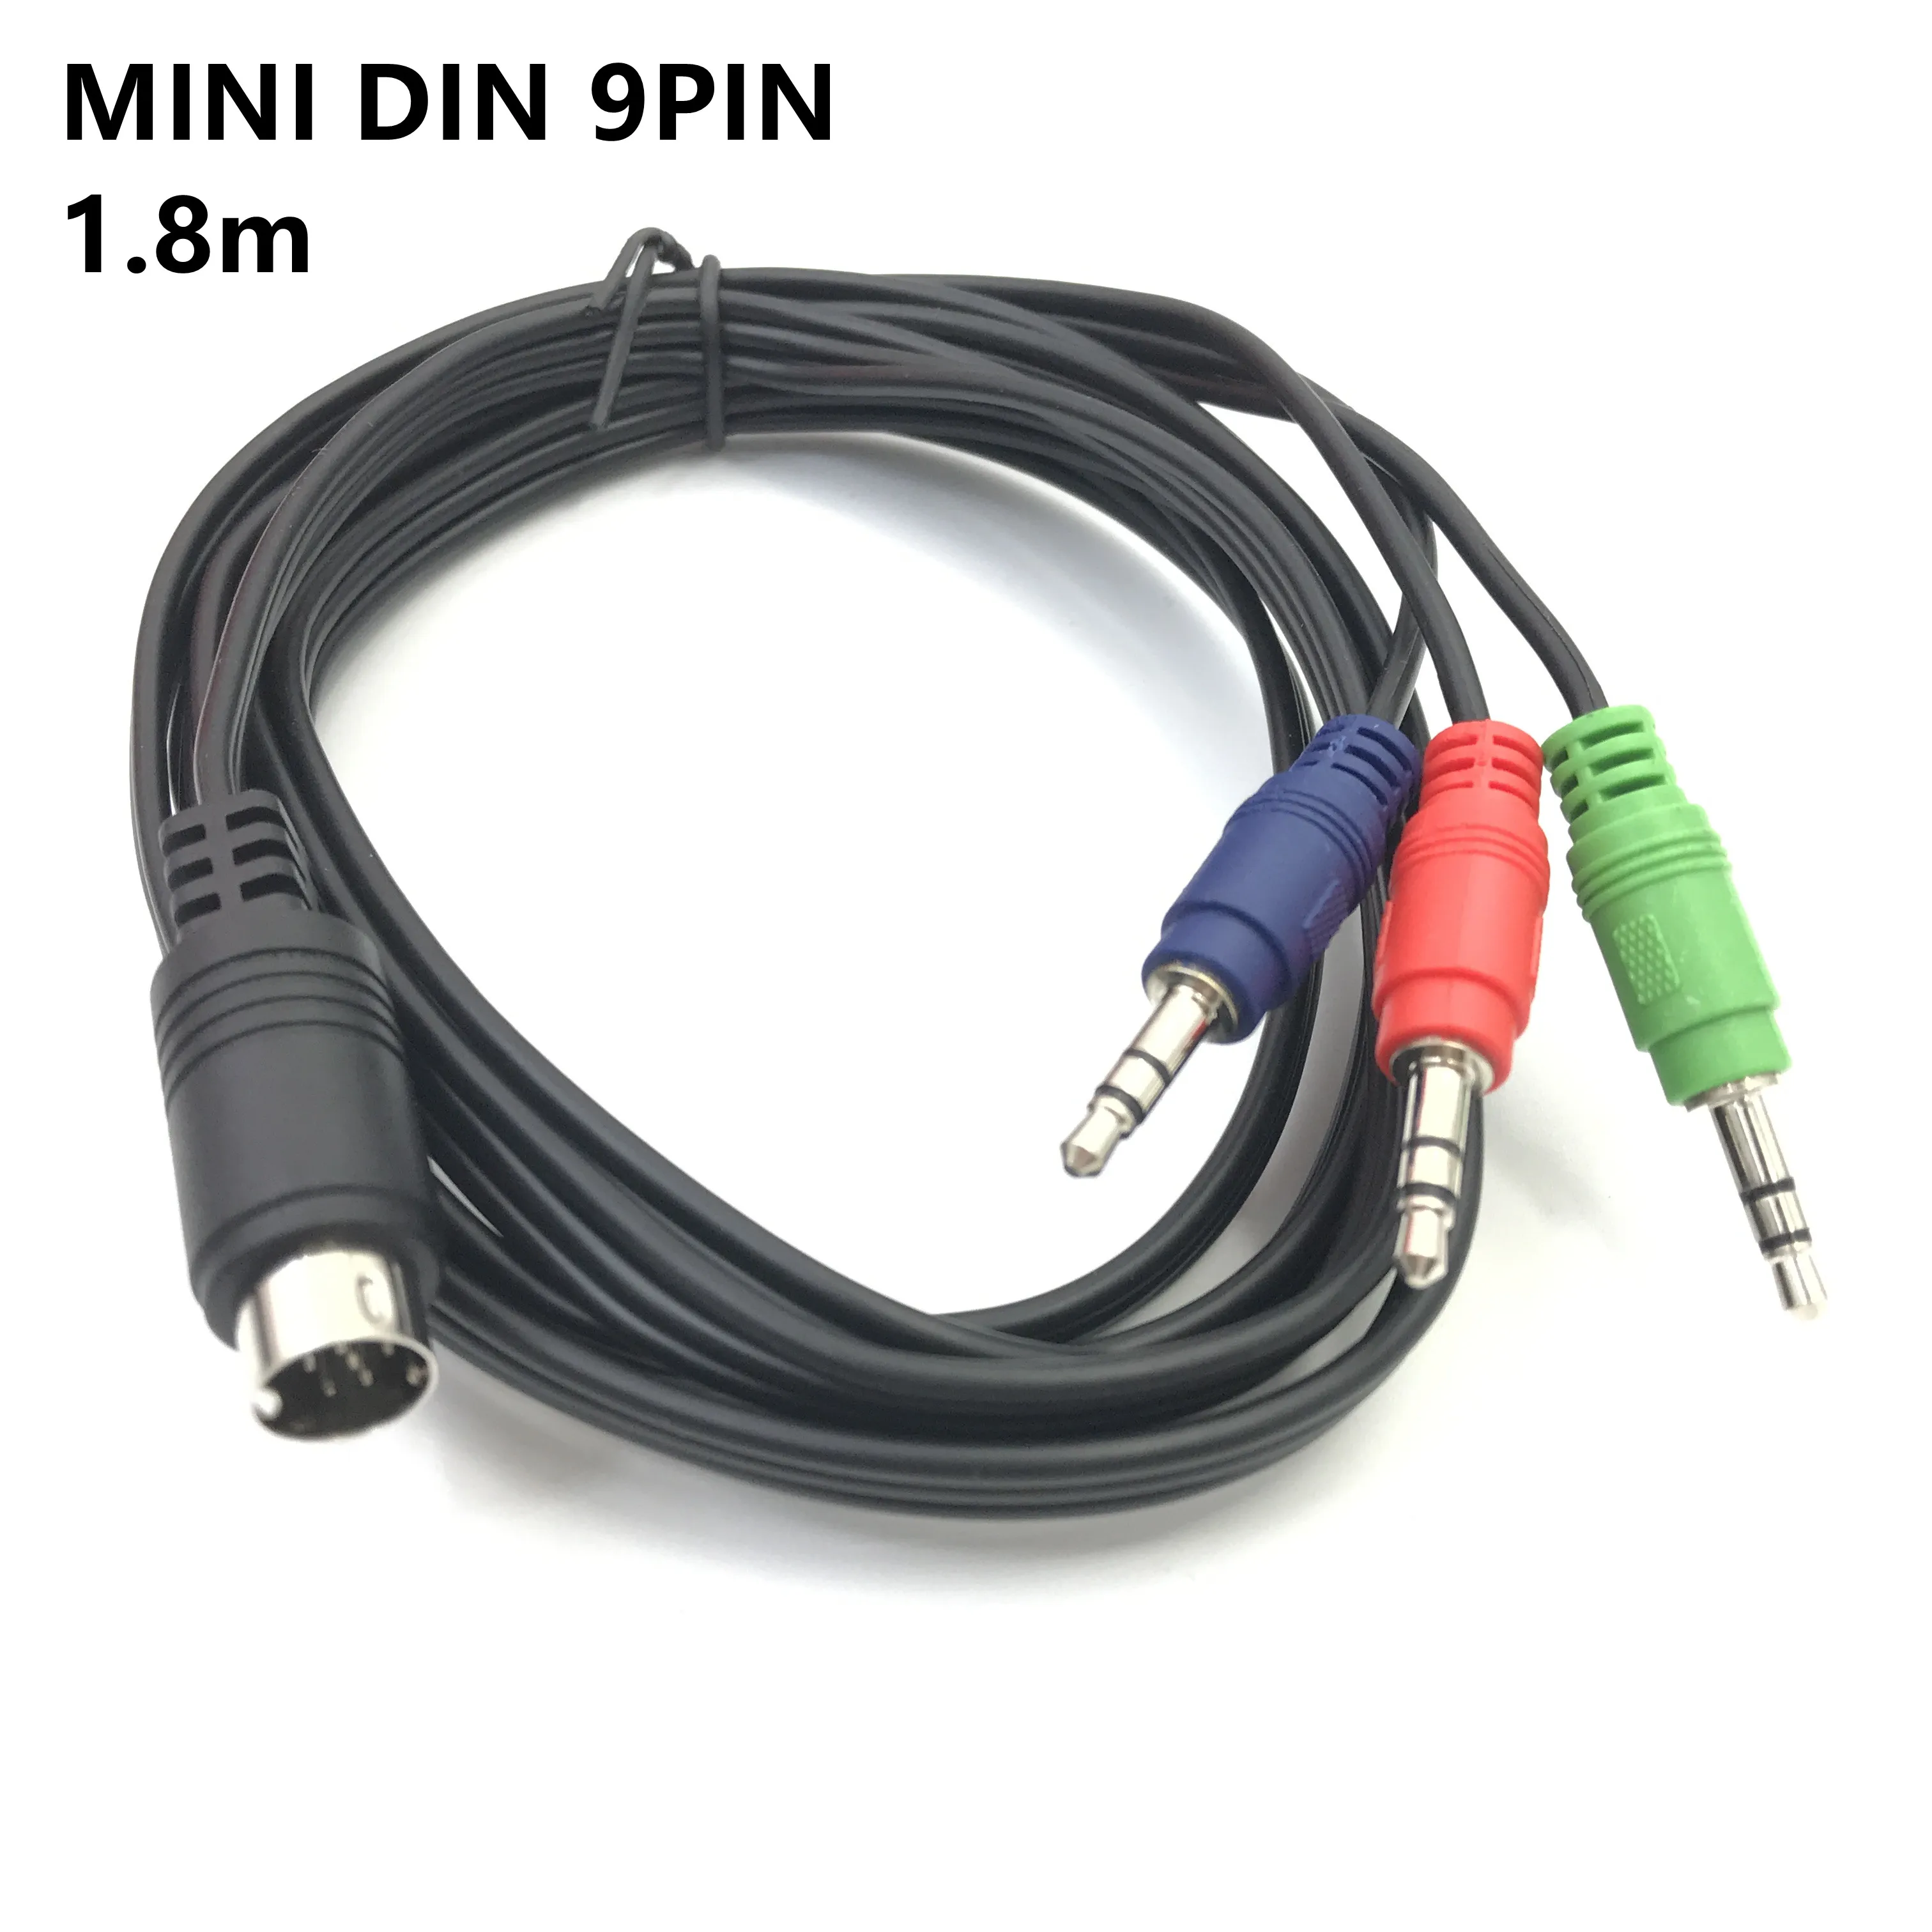 mini DIN 9-pin Male to 3*3.5mm Audio DIN Cable for audio receivers，monitoring equipment, and more 6 ft